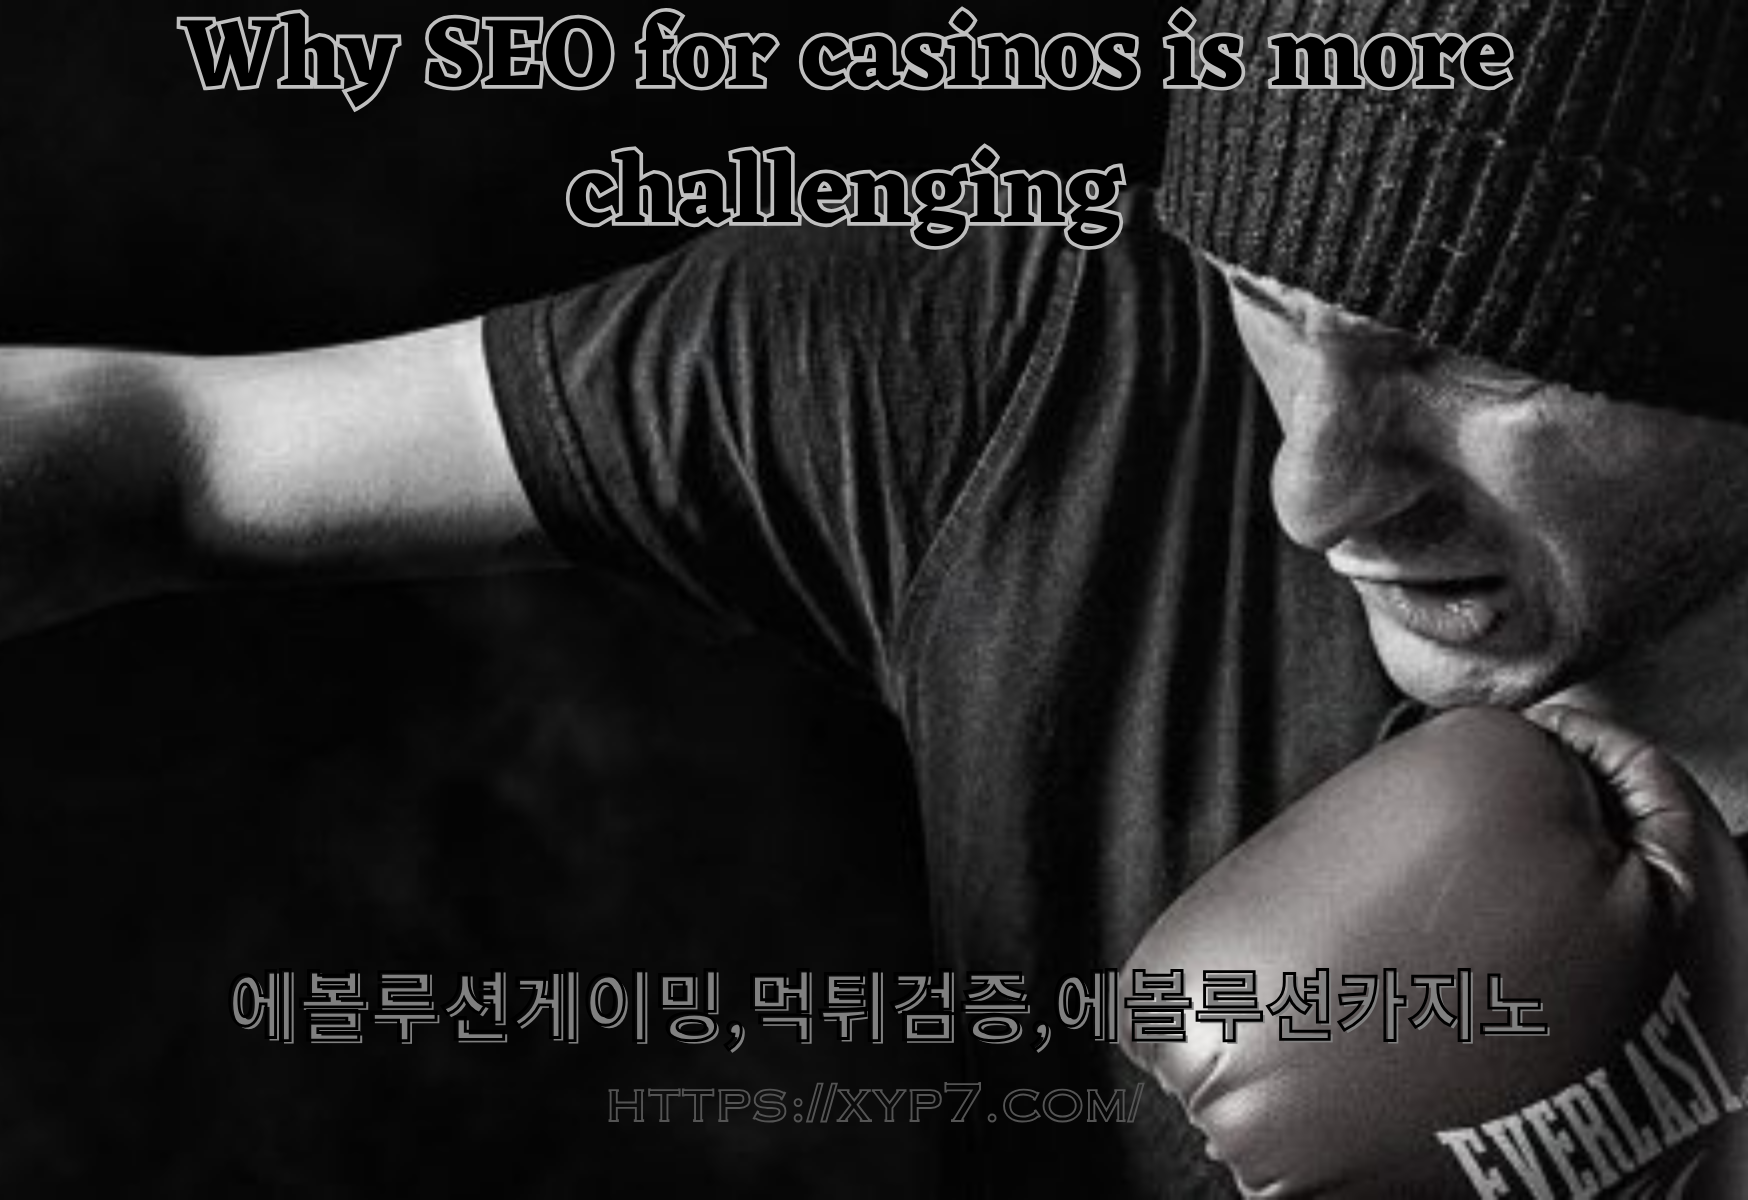 Why SEO for casinos is more challenging